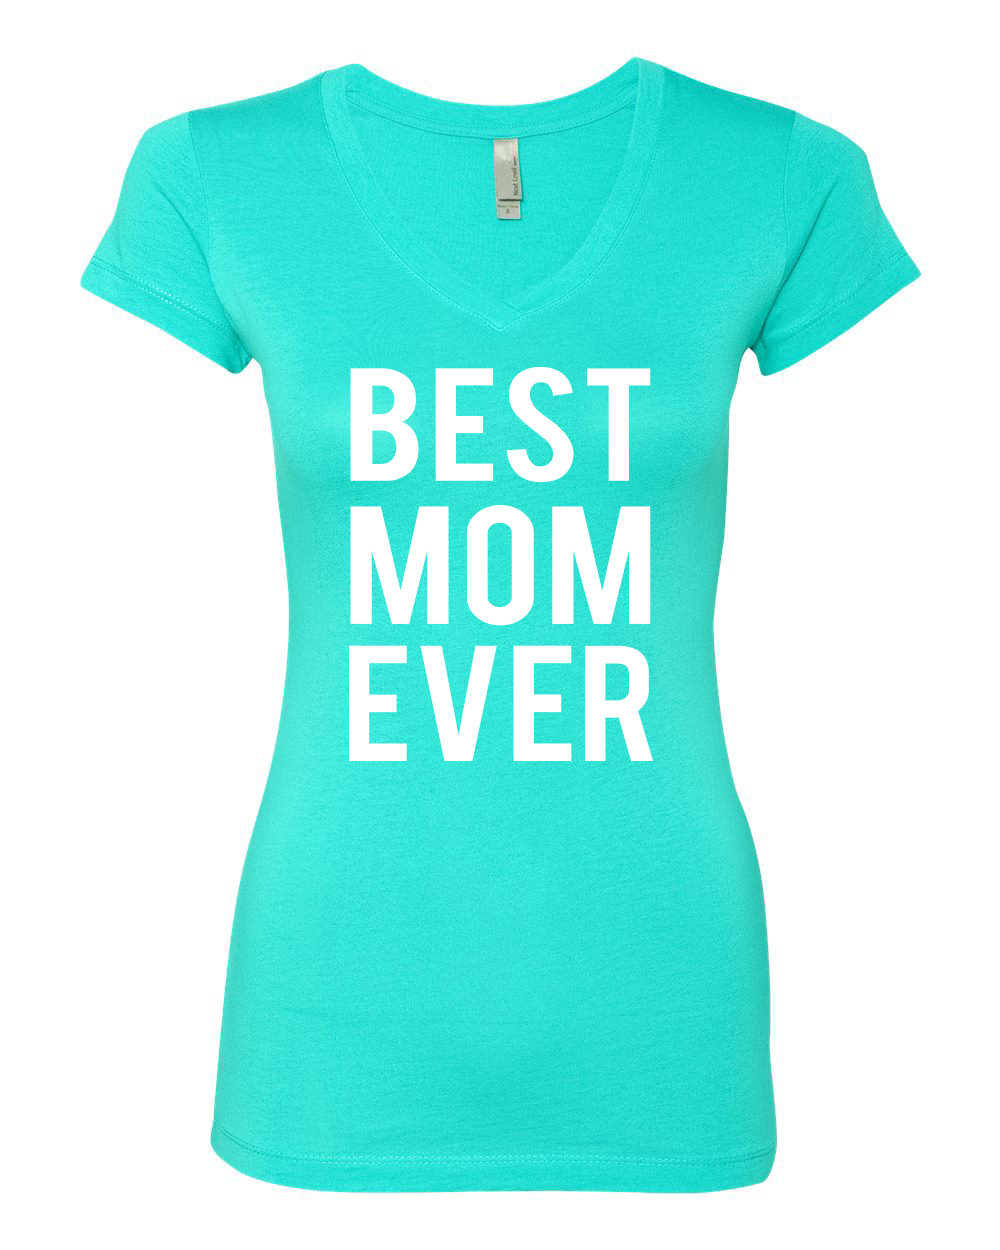 Wild Bobby, Best Mom Ever Mothers Day Gift, Mother's Day, Women Junior Fit V-Neck Tee, Tahiti Blue, X-Large - image 2 of 3